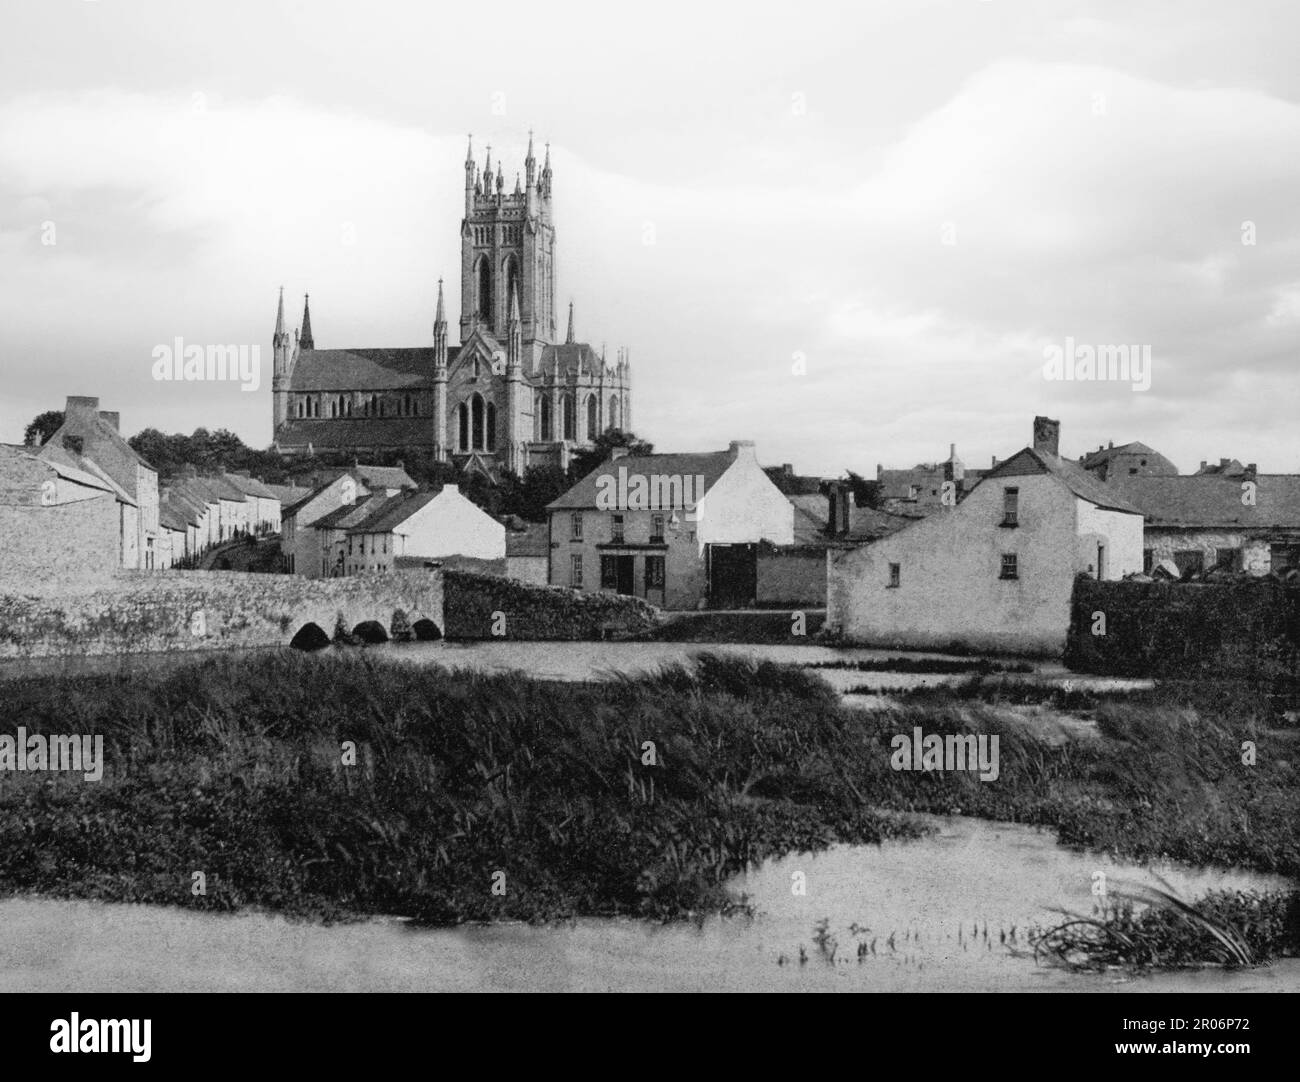 A late 19th century view of St Mary's Roman Catholic church, aka 'the church of St Kieran' and 'the Cathedral of the Assumption' in the Irish city of Kilkenny in County Kilkenny, Ireland on both banks of the River Nore. Designed by William Deane Butler (c.1794-1857) in 1842, from cut-limestone which was sourced locally, the cathedral has a cruciform plan and its style is described as ‘Early English Gothic’. Stock Photo